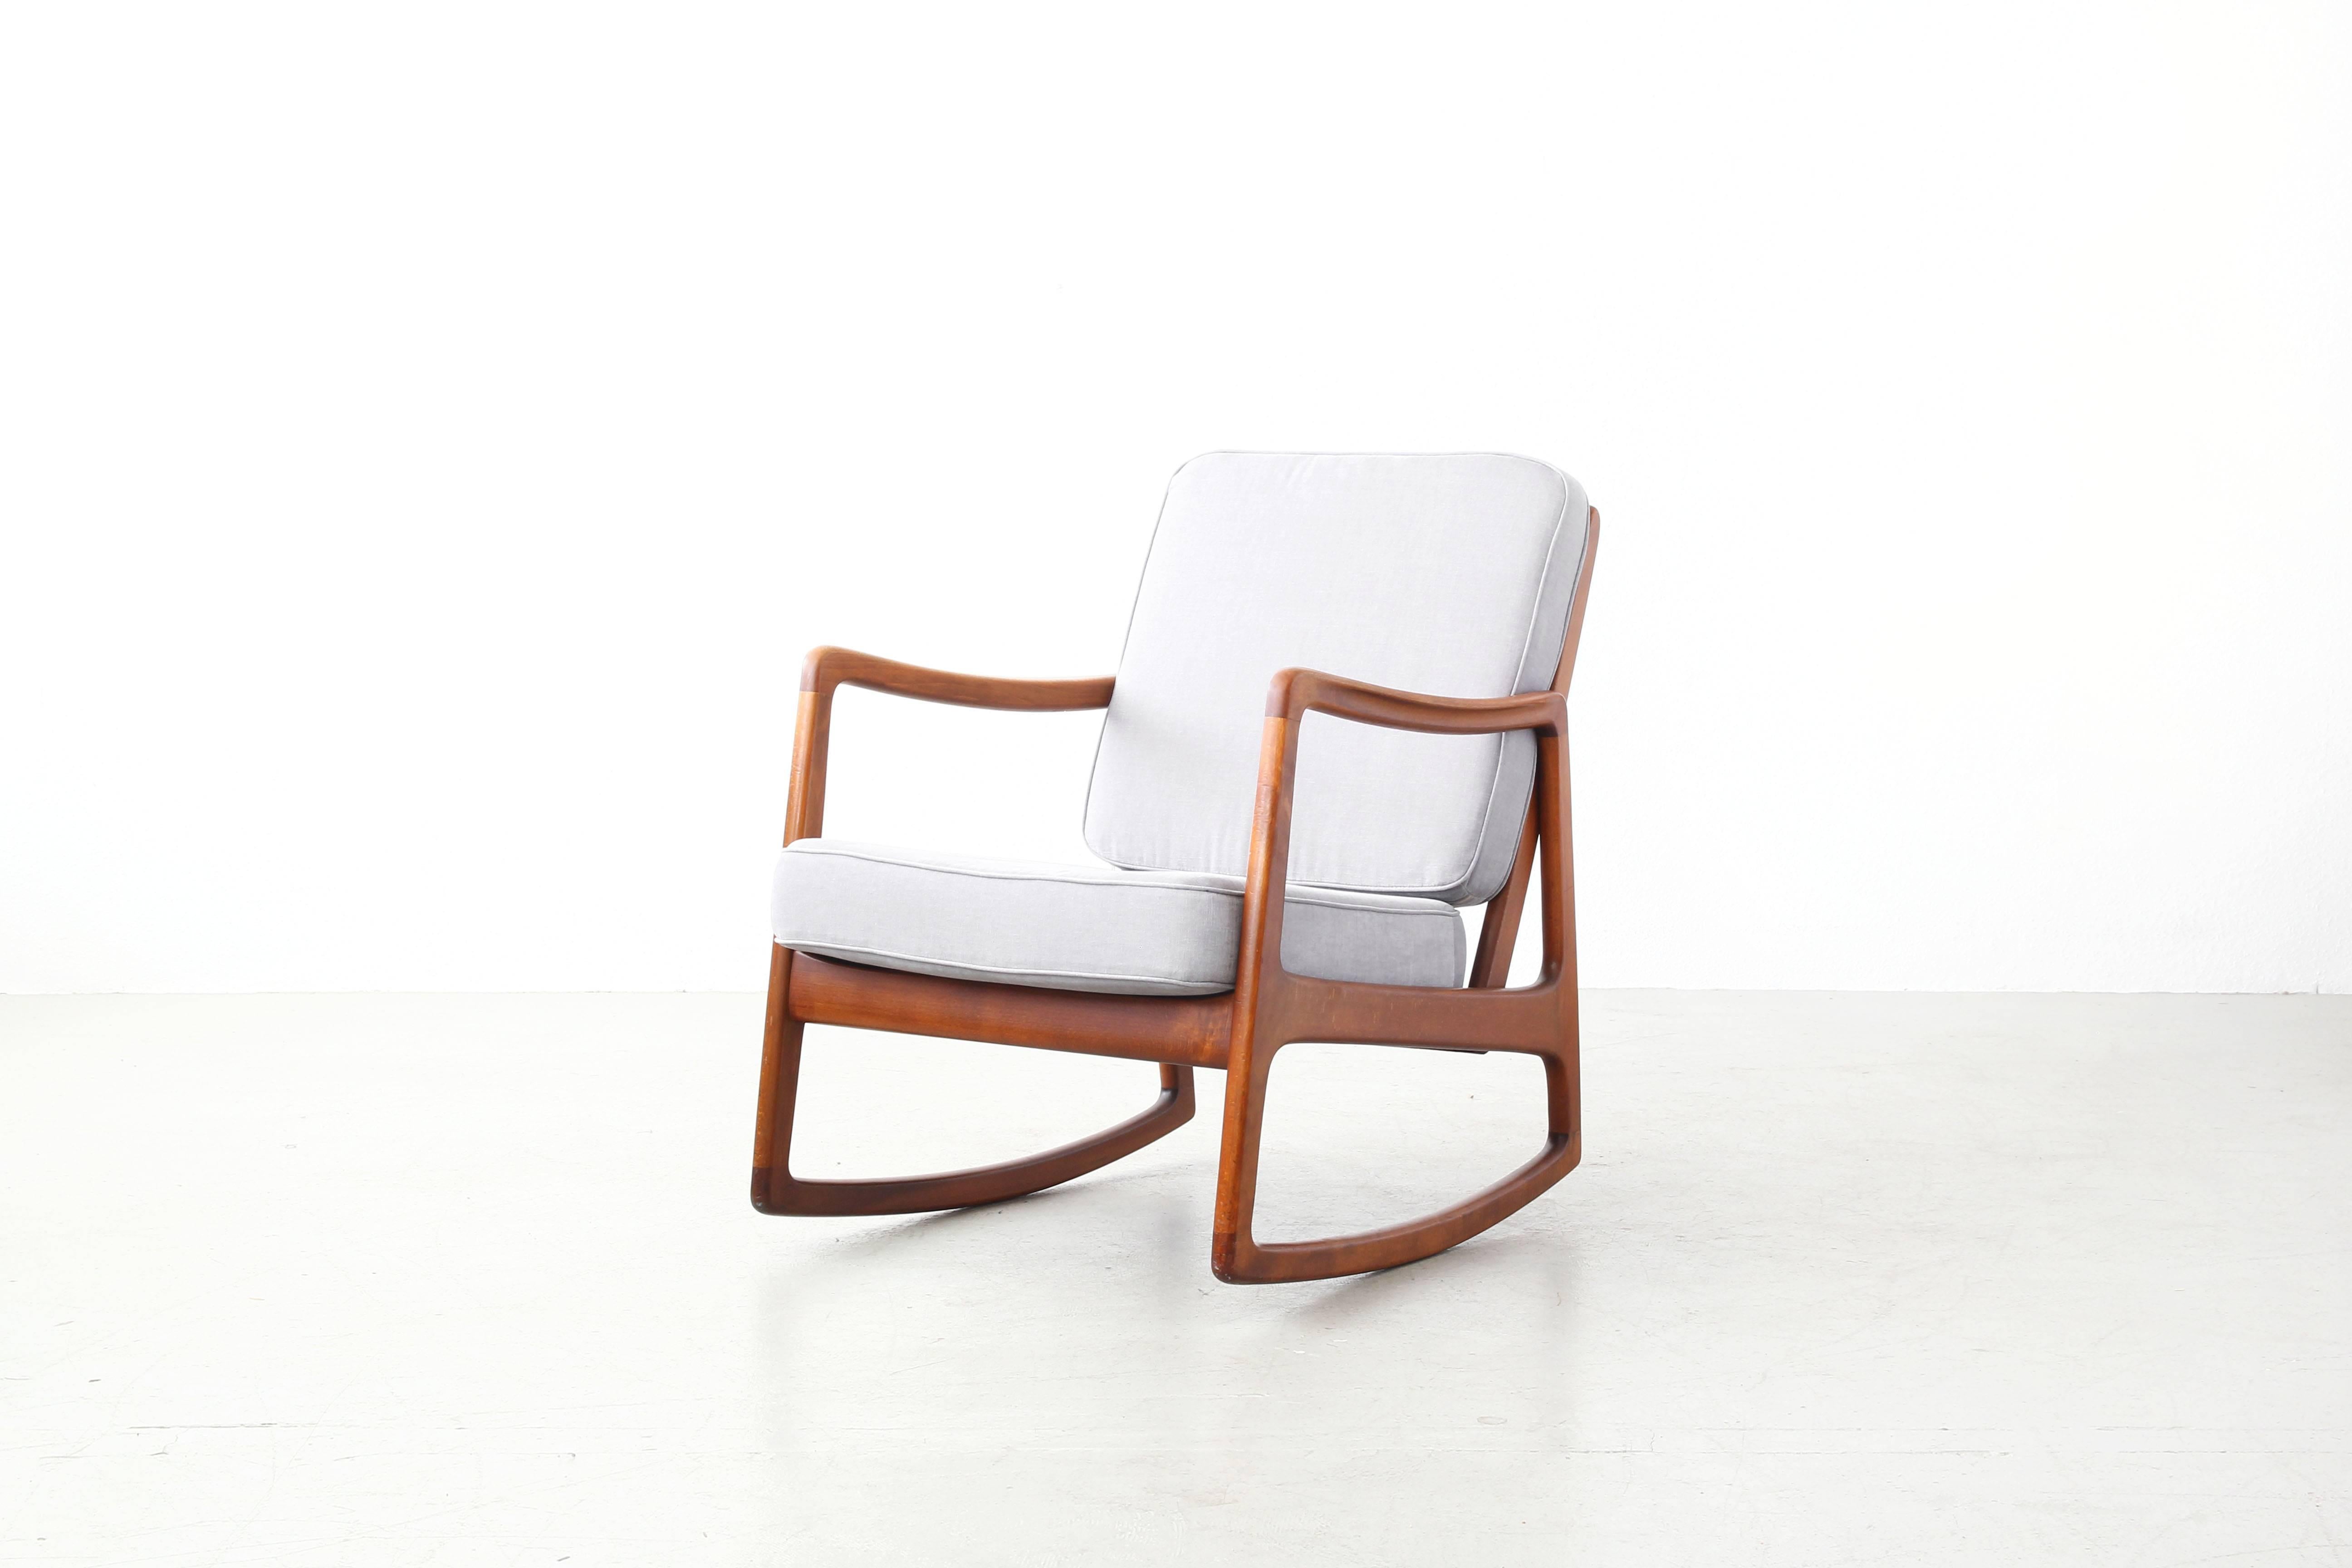 Beautiful rocking chair by Ole Wanscher
for France and Daverkosen,
designed in 1960, made in Denmark.
Designer: Ole Wanscher
Manufacturer: France and Daverkosen
Materials: Patinated beechwood, new high quality fabric
Condition: This rocking